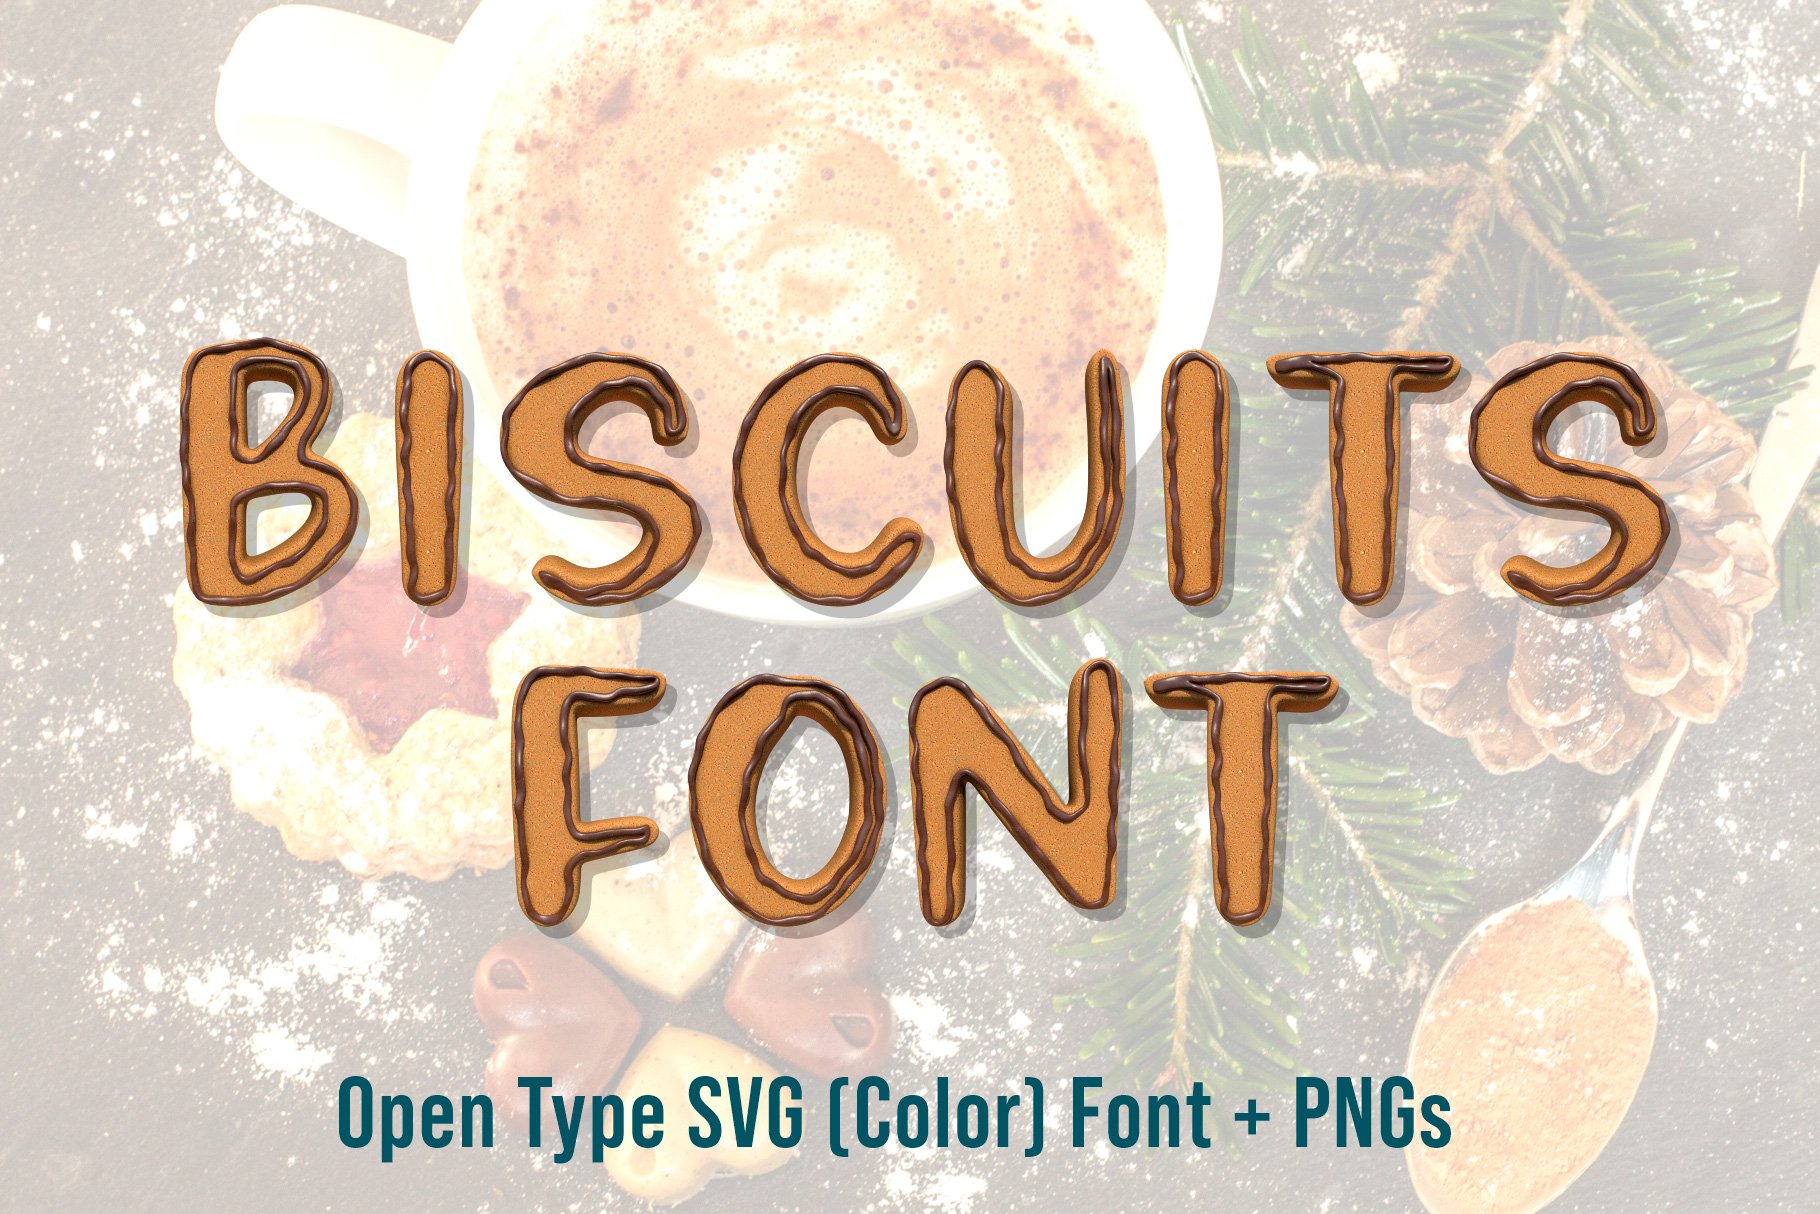 Biscuits Opentype SVG Font and PNGs cover image.